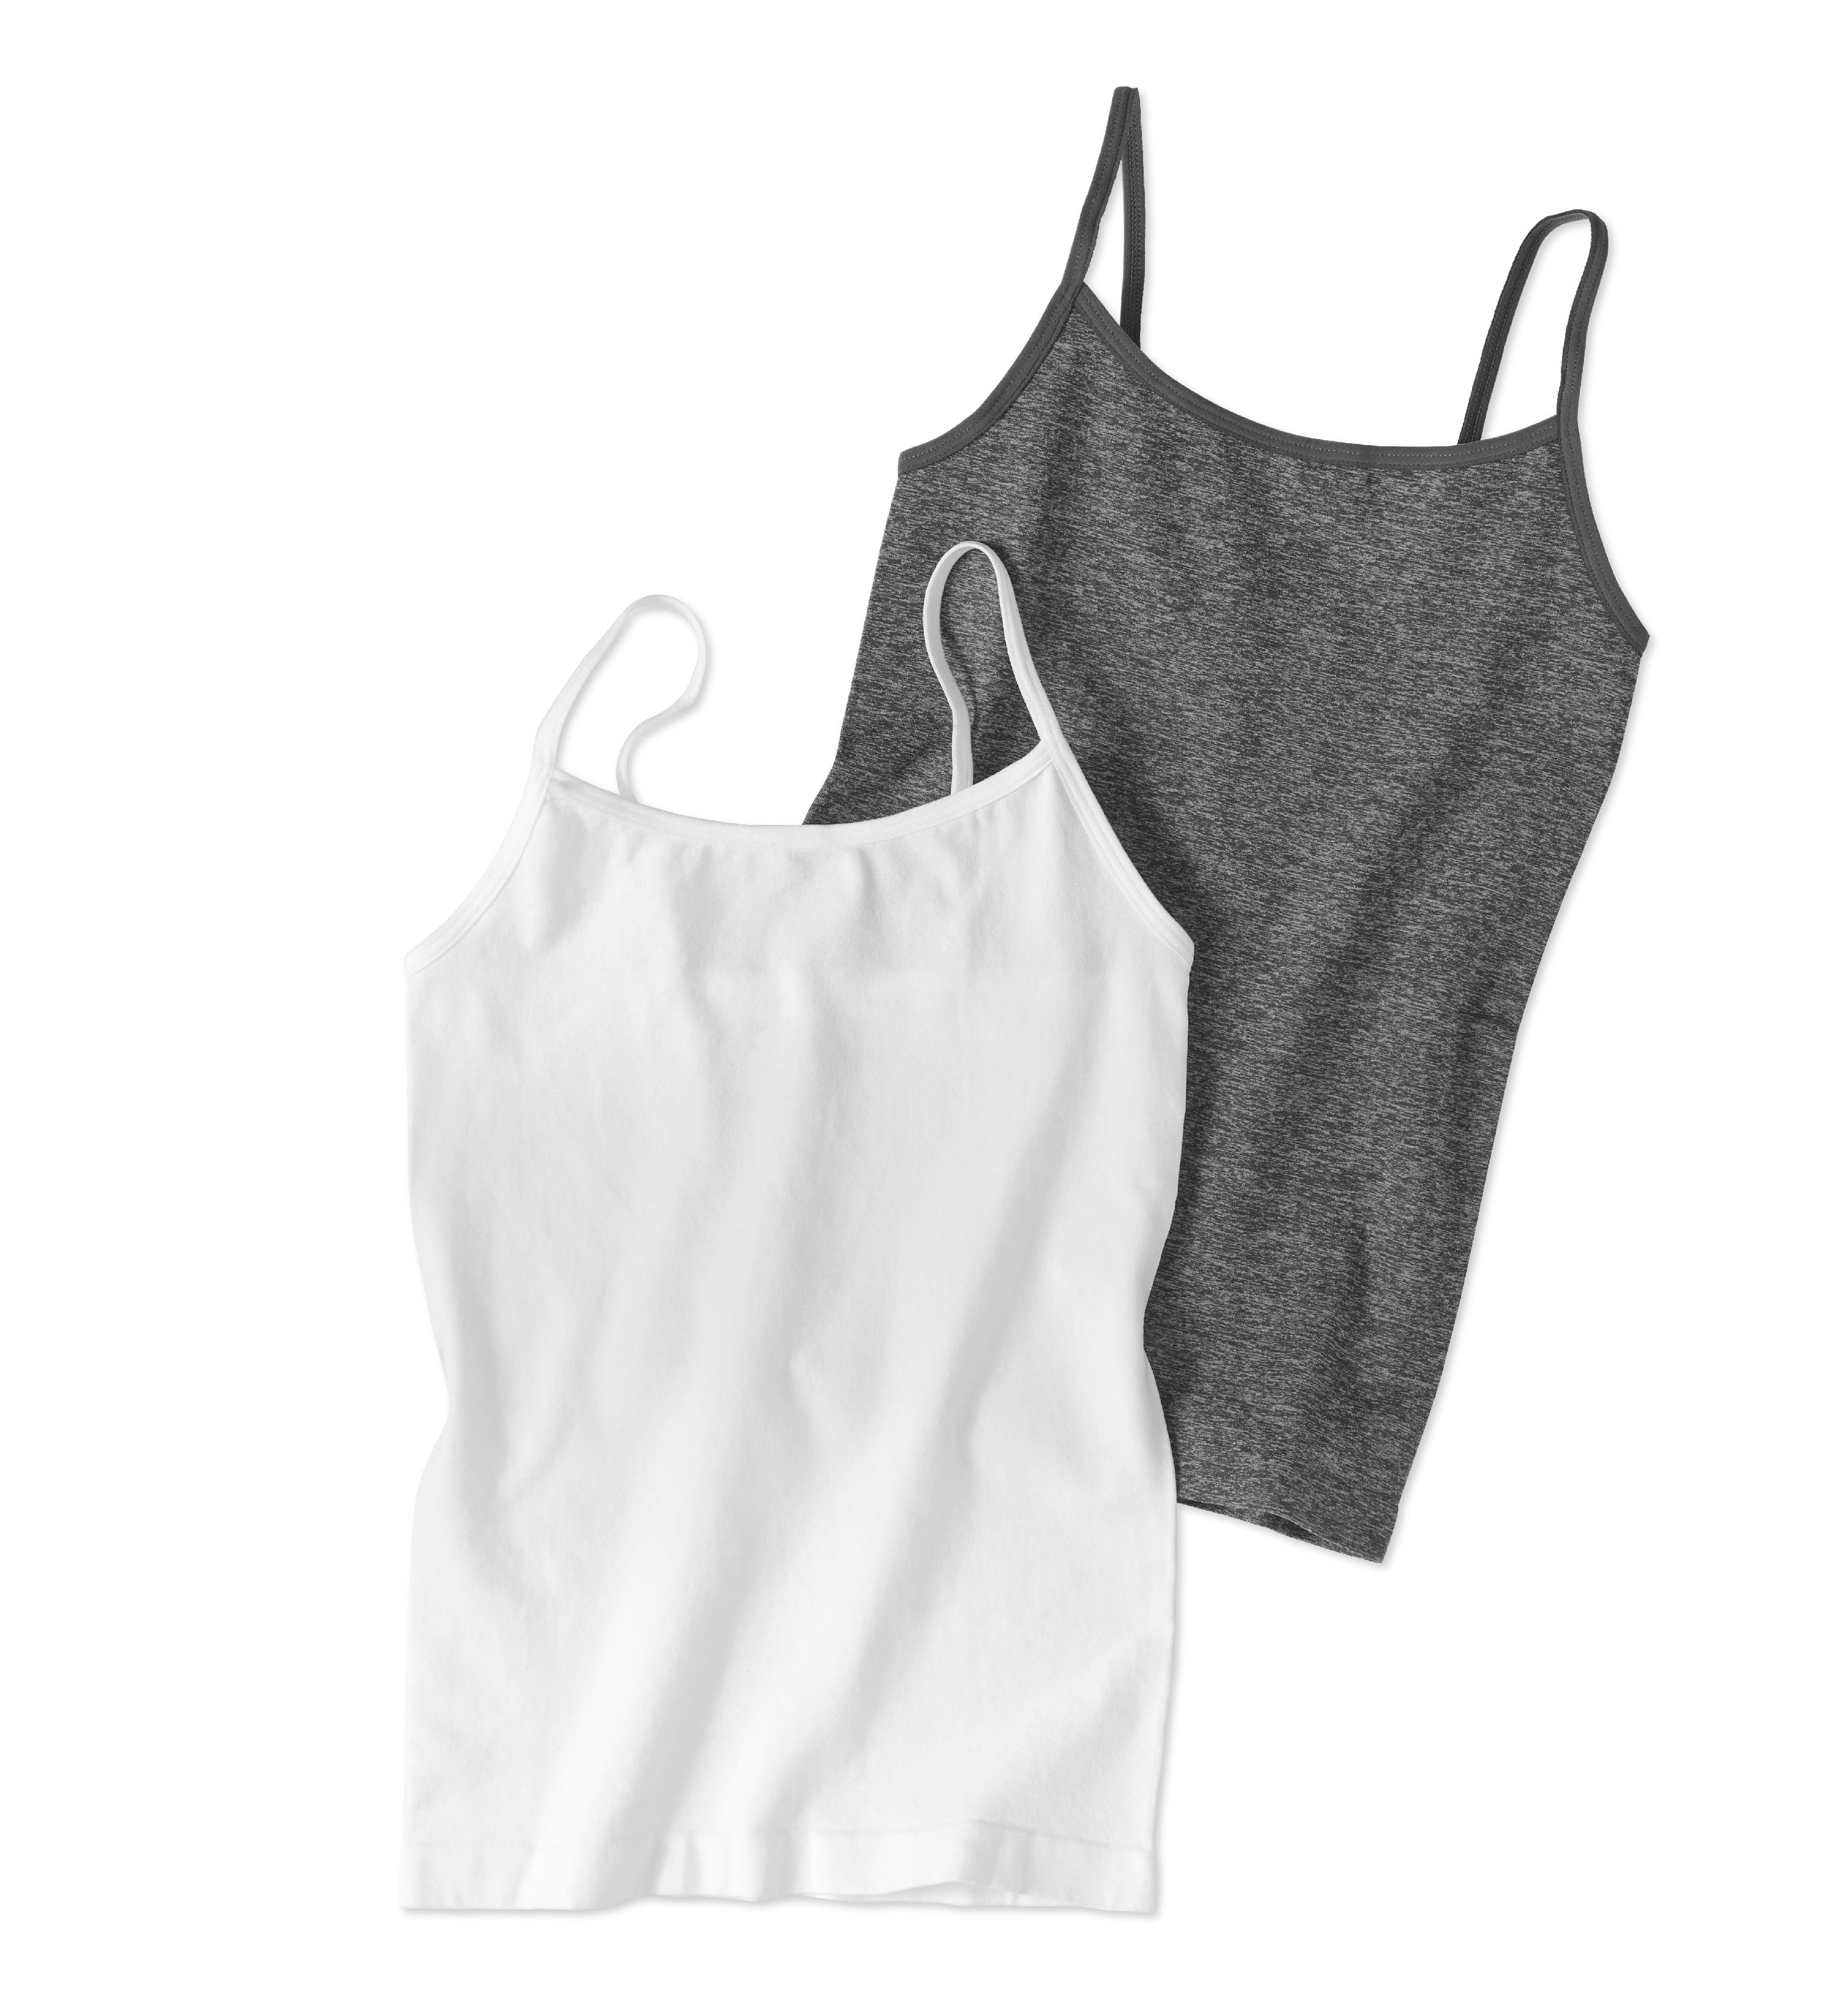 Faded Glory Girls Undershirts, 2 Pack Seamless Camis, Sizes 2-XL